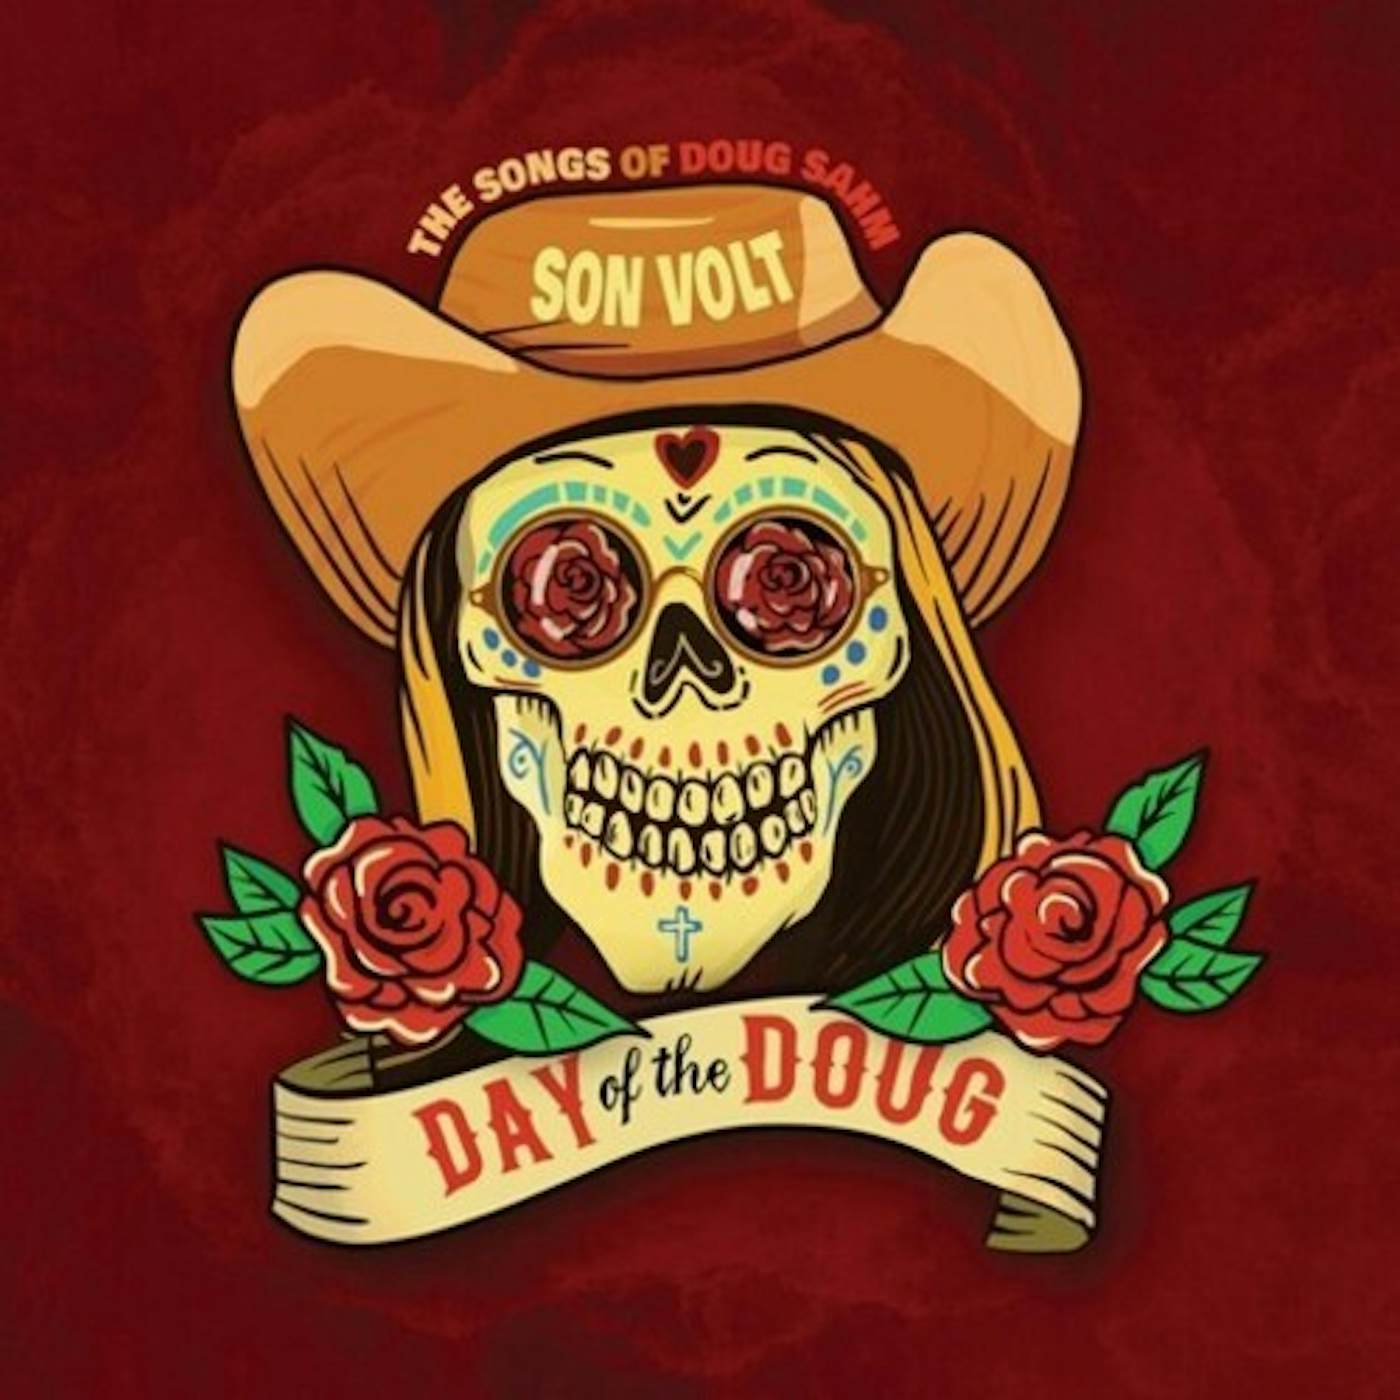 Son Volt DAY OF THE DOUG CD